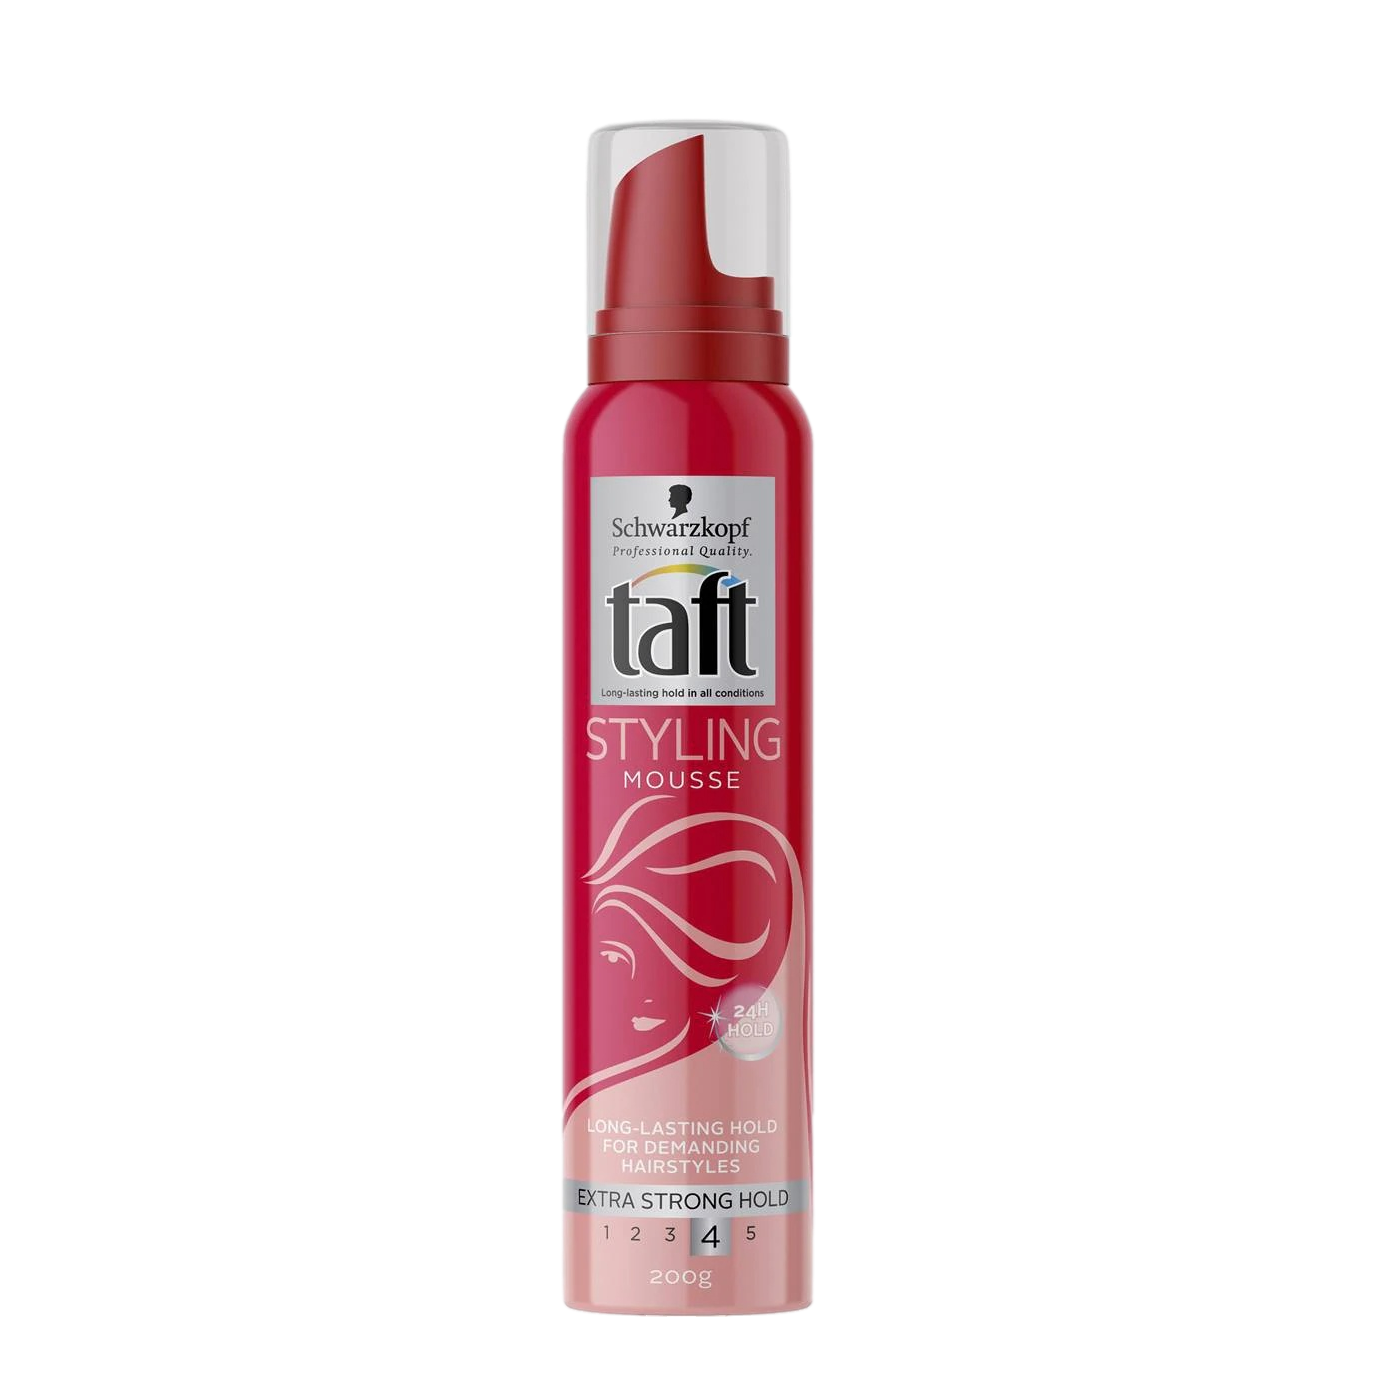 Taft Styling Mousse Extra Strong Hold 4 200g